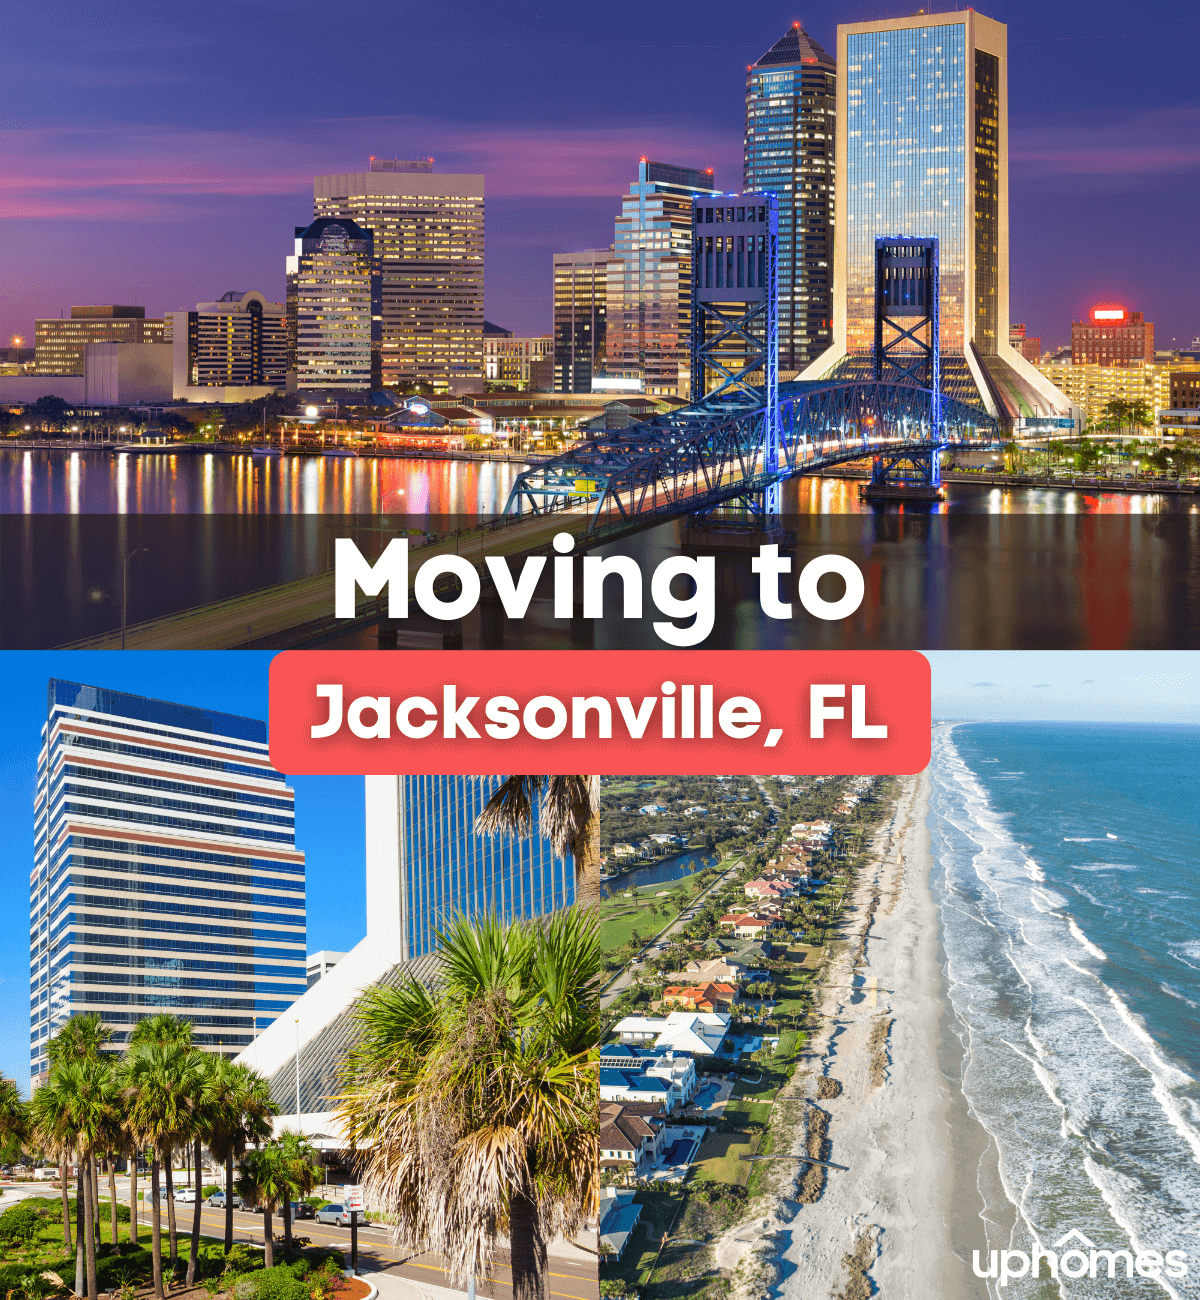 Moving to Jacksonville, FL - What is it like living in Jacksonville, Florida?